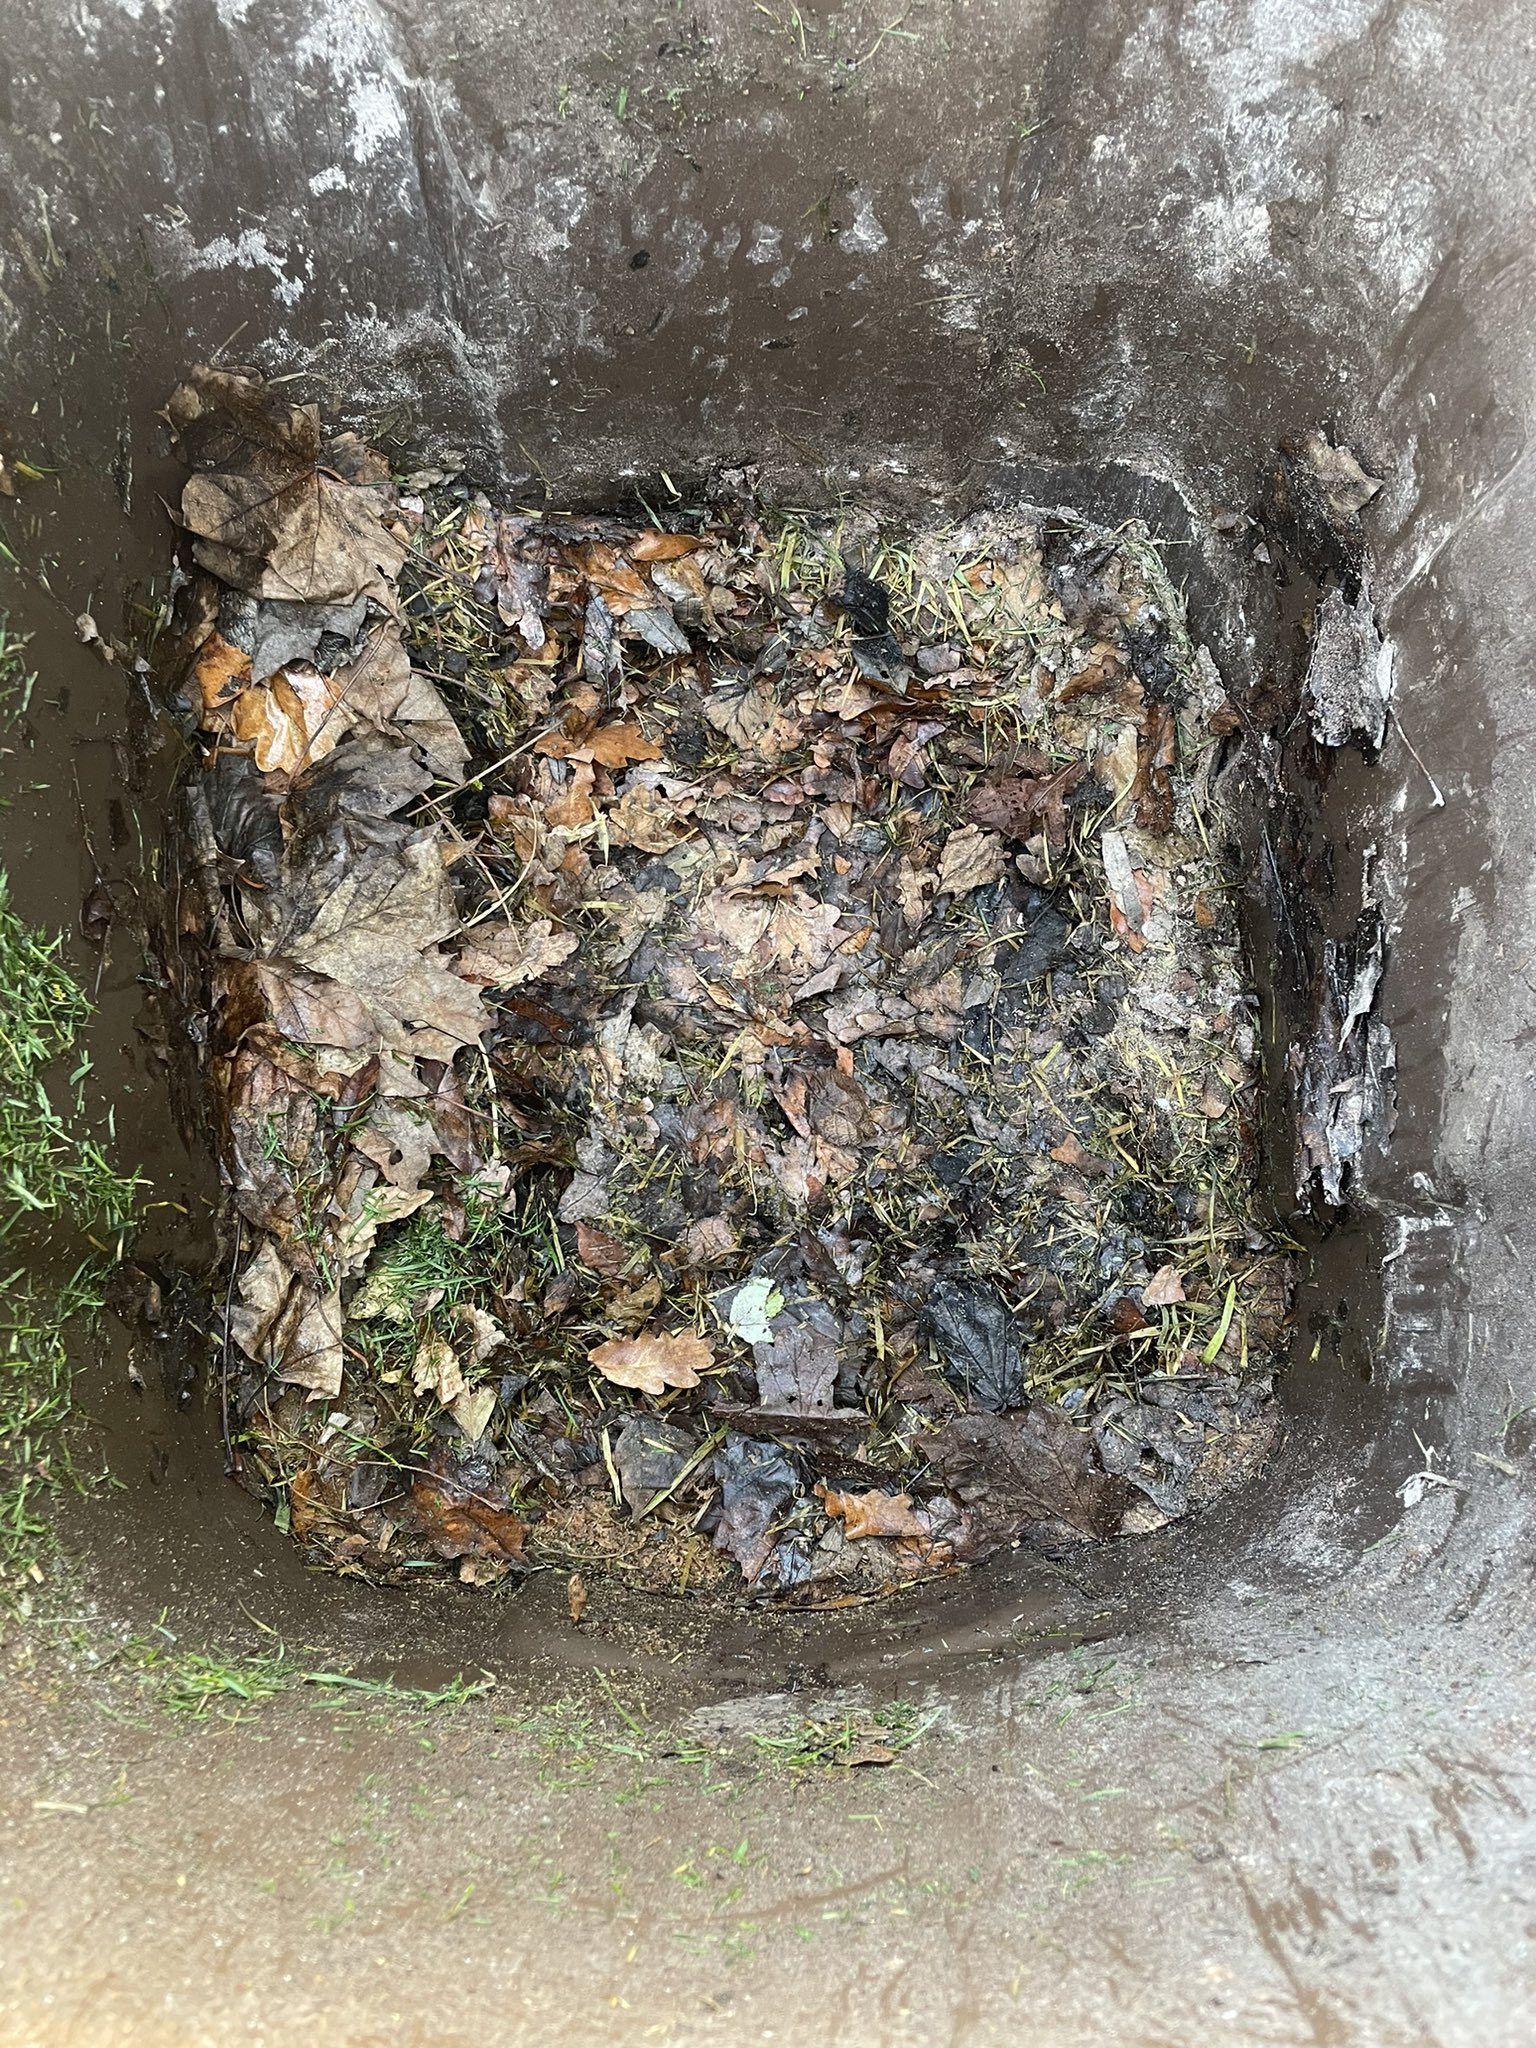 The inside of a garden waste bin with old leaves and grass